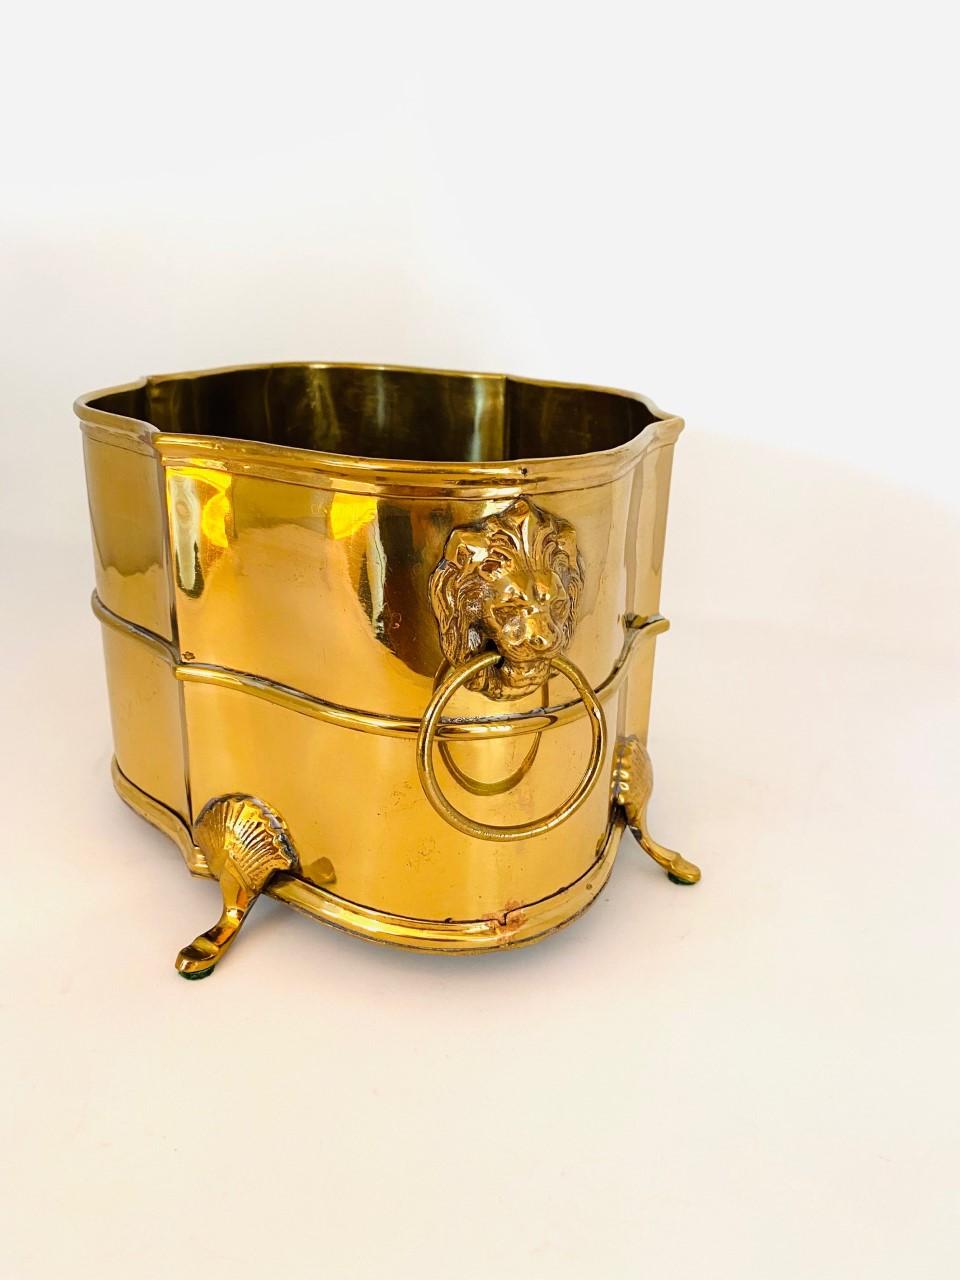 Antique Brass Jardiniere Planter with Lion Head and Feet Details For Sale 7